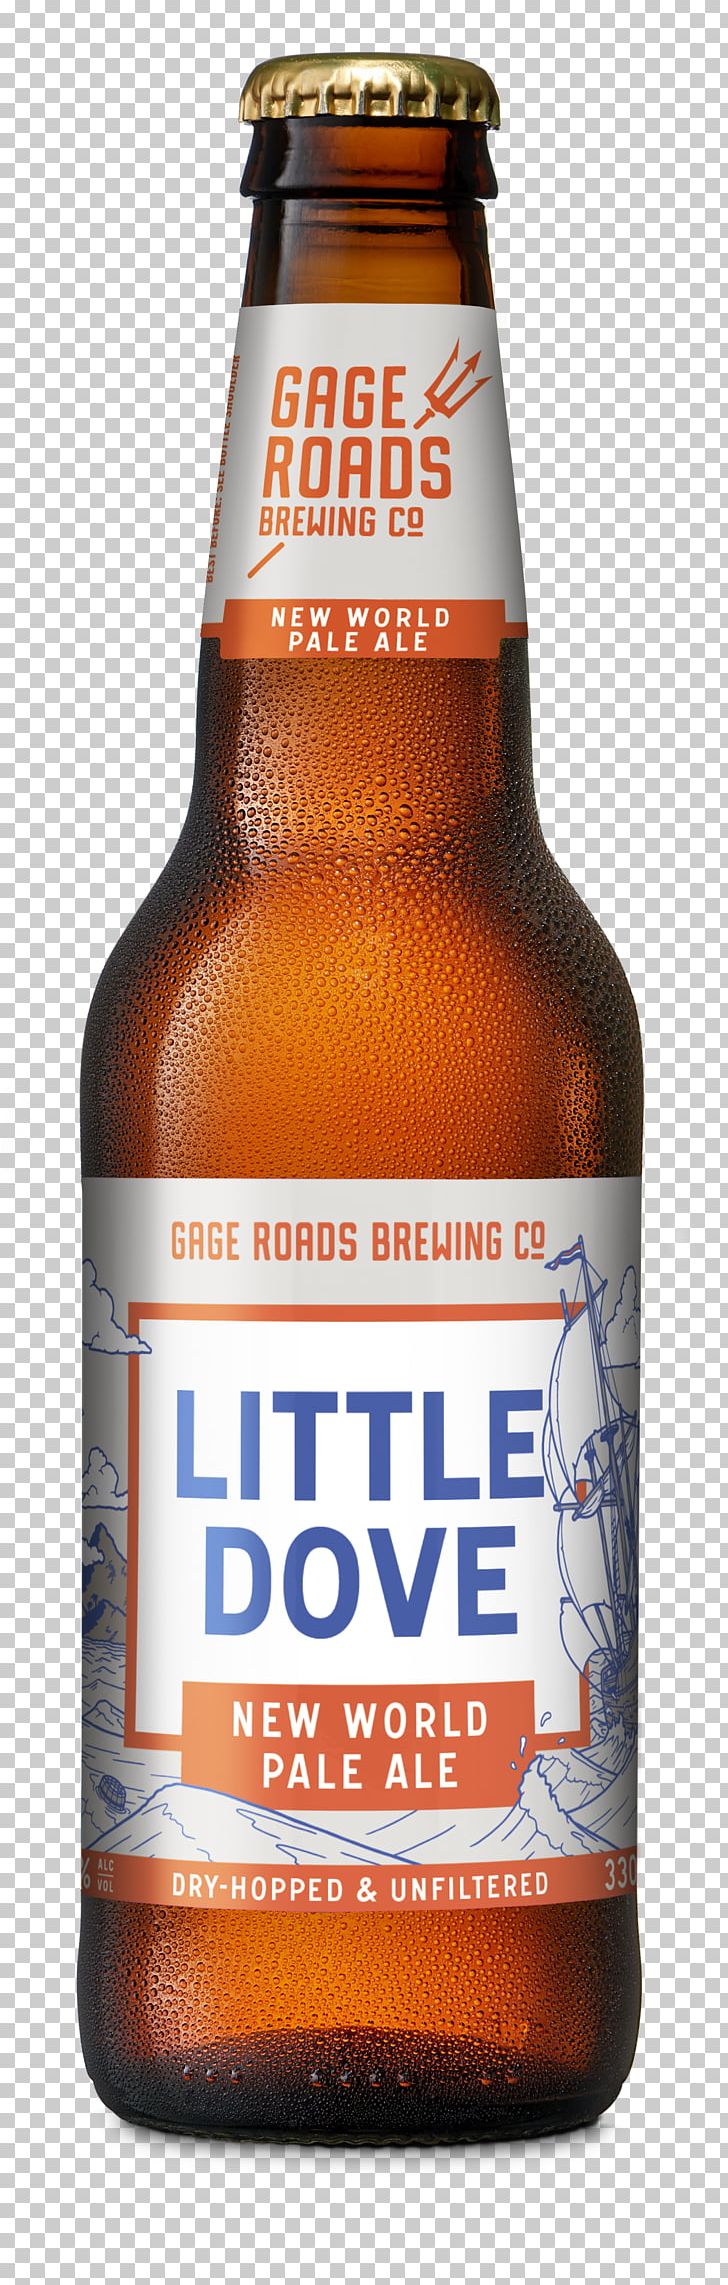 Gage Roads Brewing Company Beer India Pale Ale PNG, Clipart, Aaron Brewer, Ale, Australia, Beer, Beer Bottle Free PNG Download